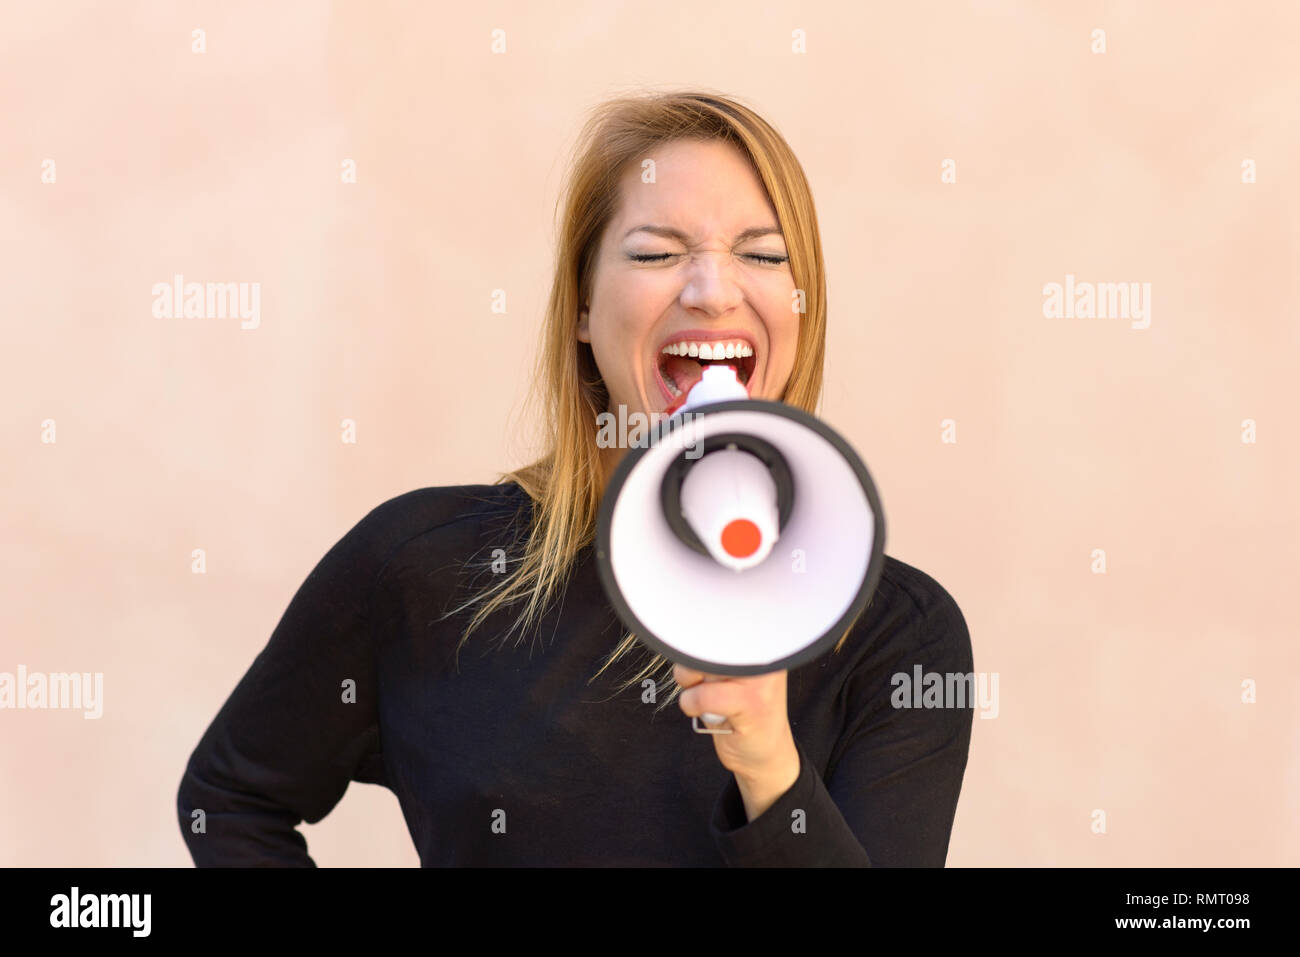 Angry woman airing her grievances yelling into a megaphone or bullhorn at a demonstration or protest in a frontal view Stock Photo